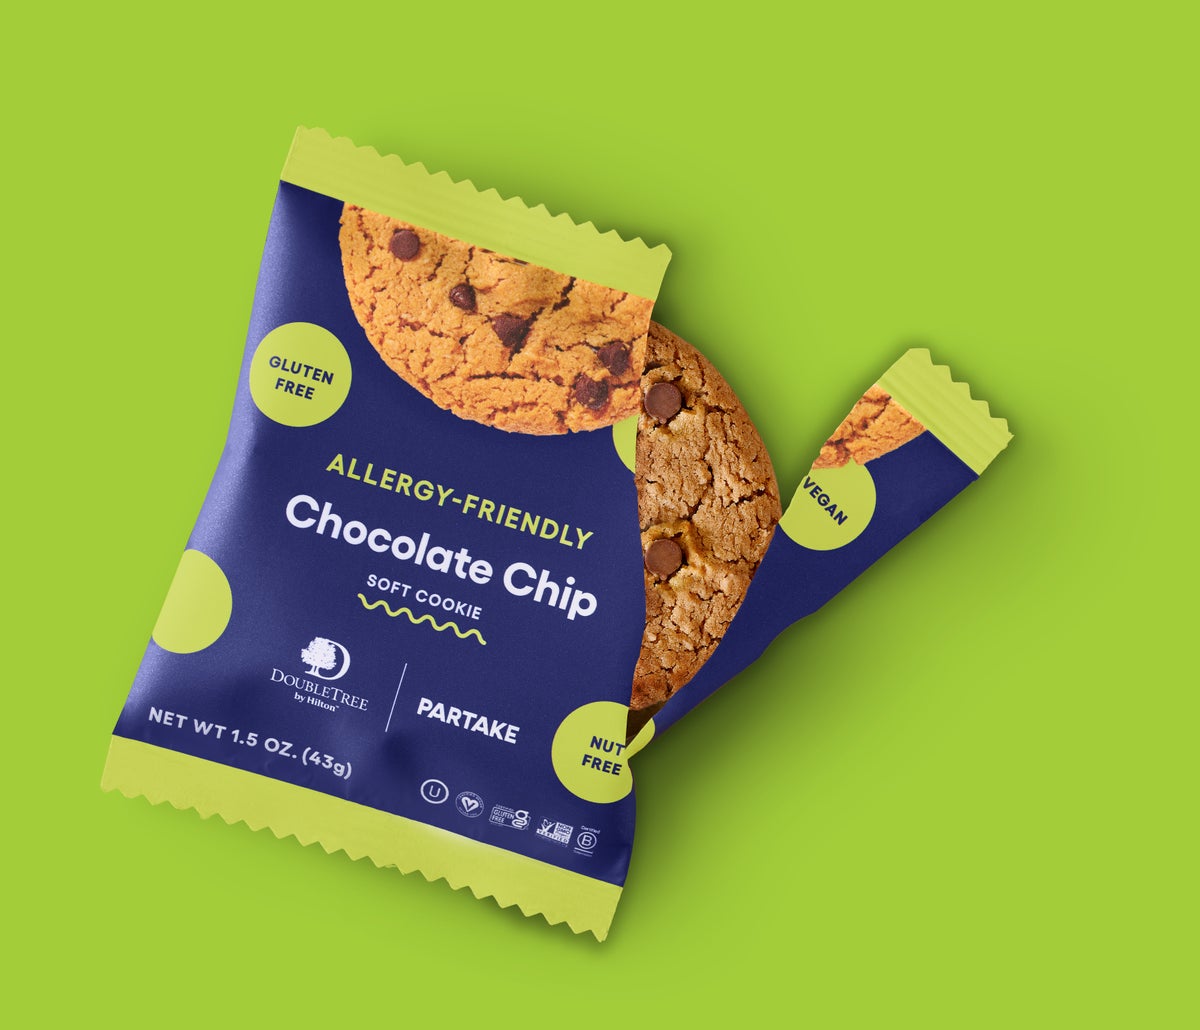 DoubleTree by Hilton Allergy friendly soft chocolate chip cookie Packaging